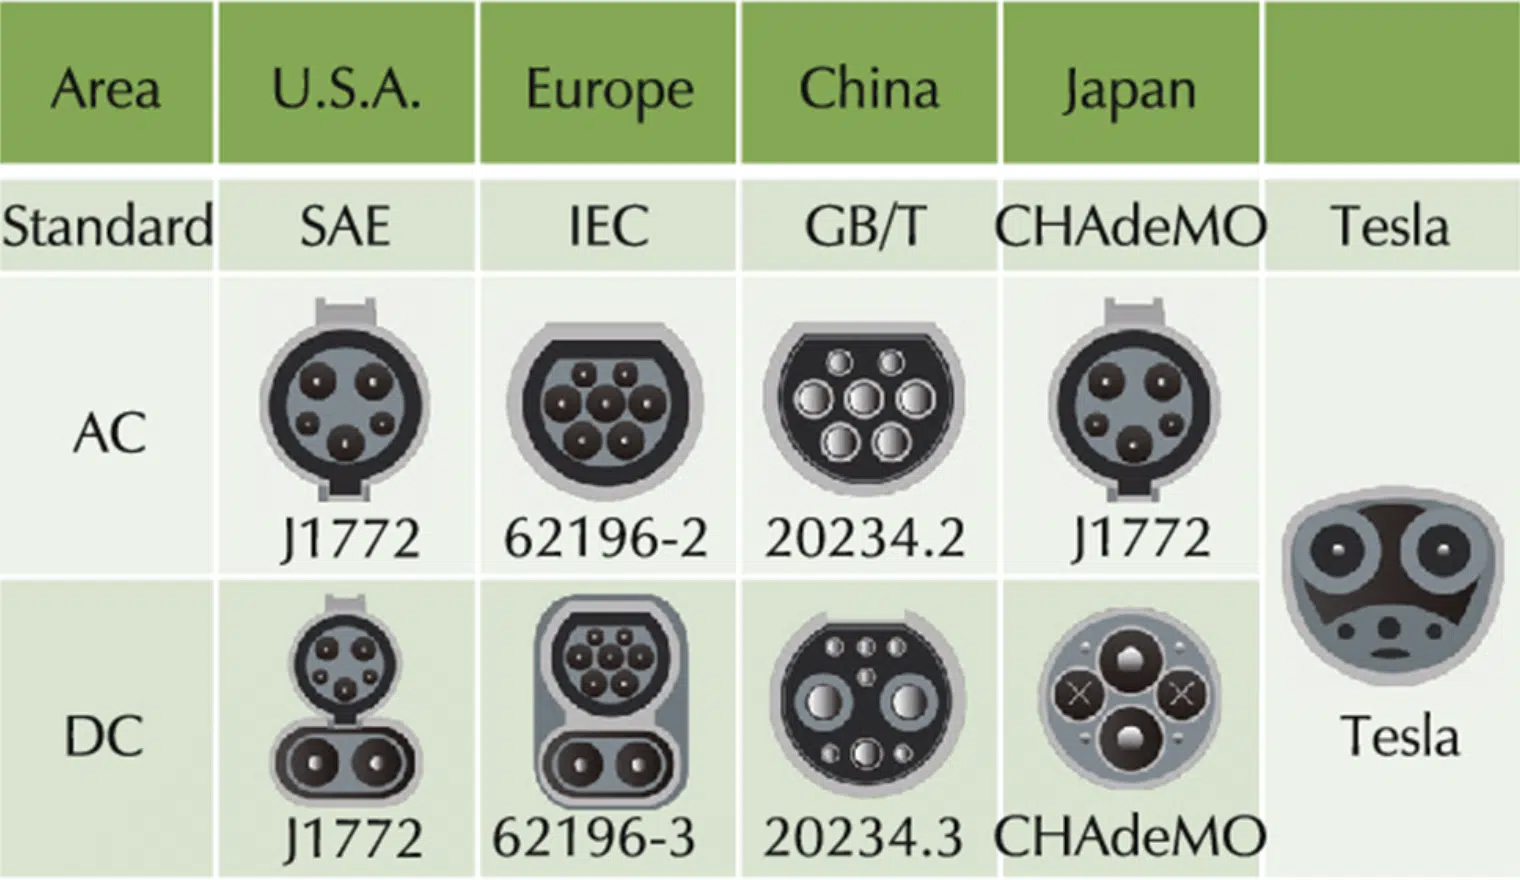 types of receptacles specific to EV manufacturers